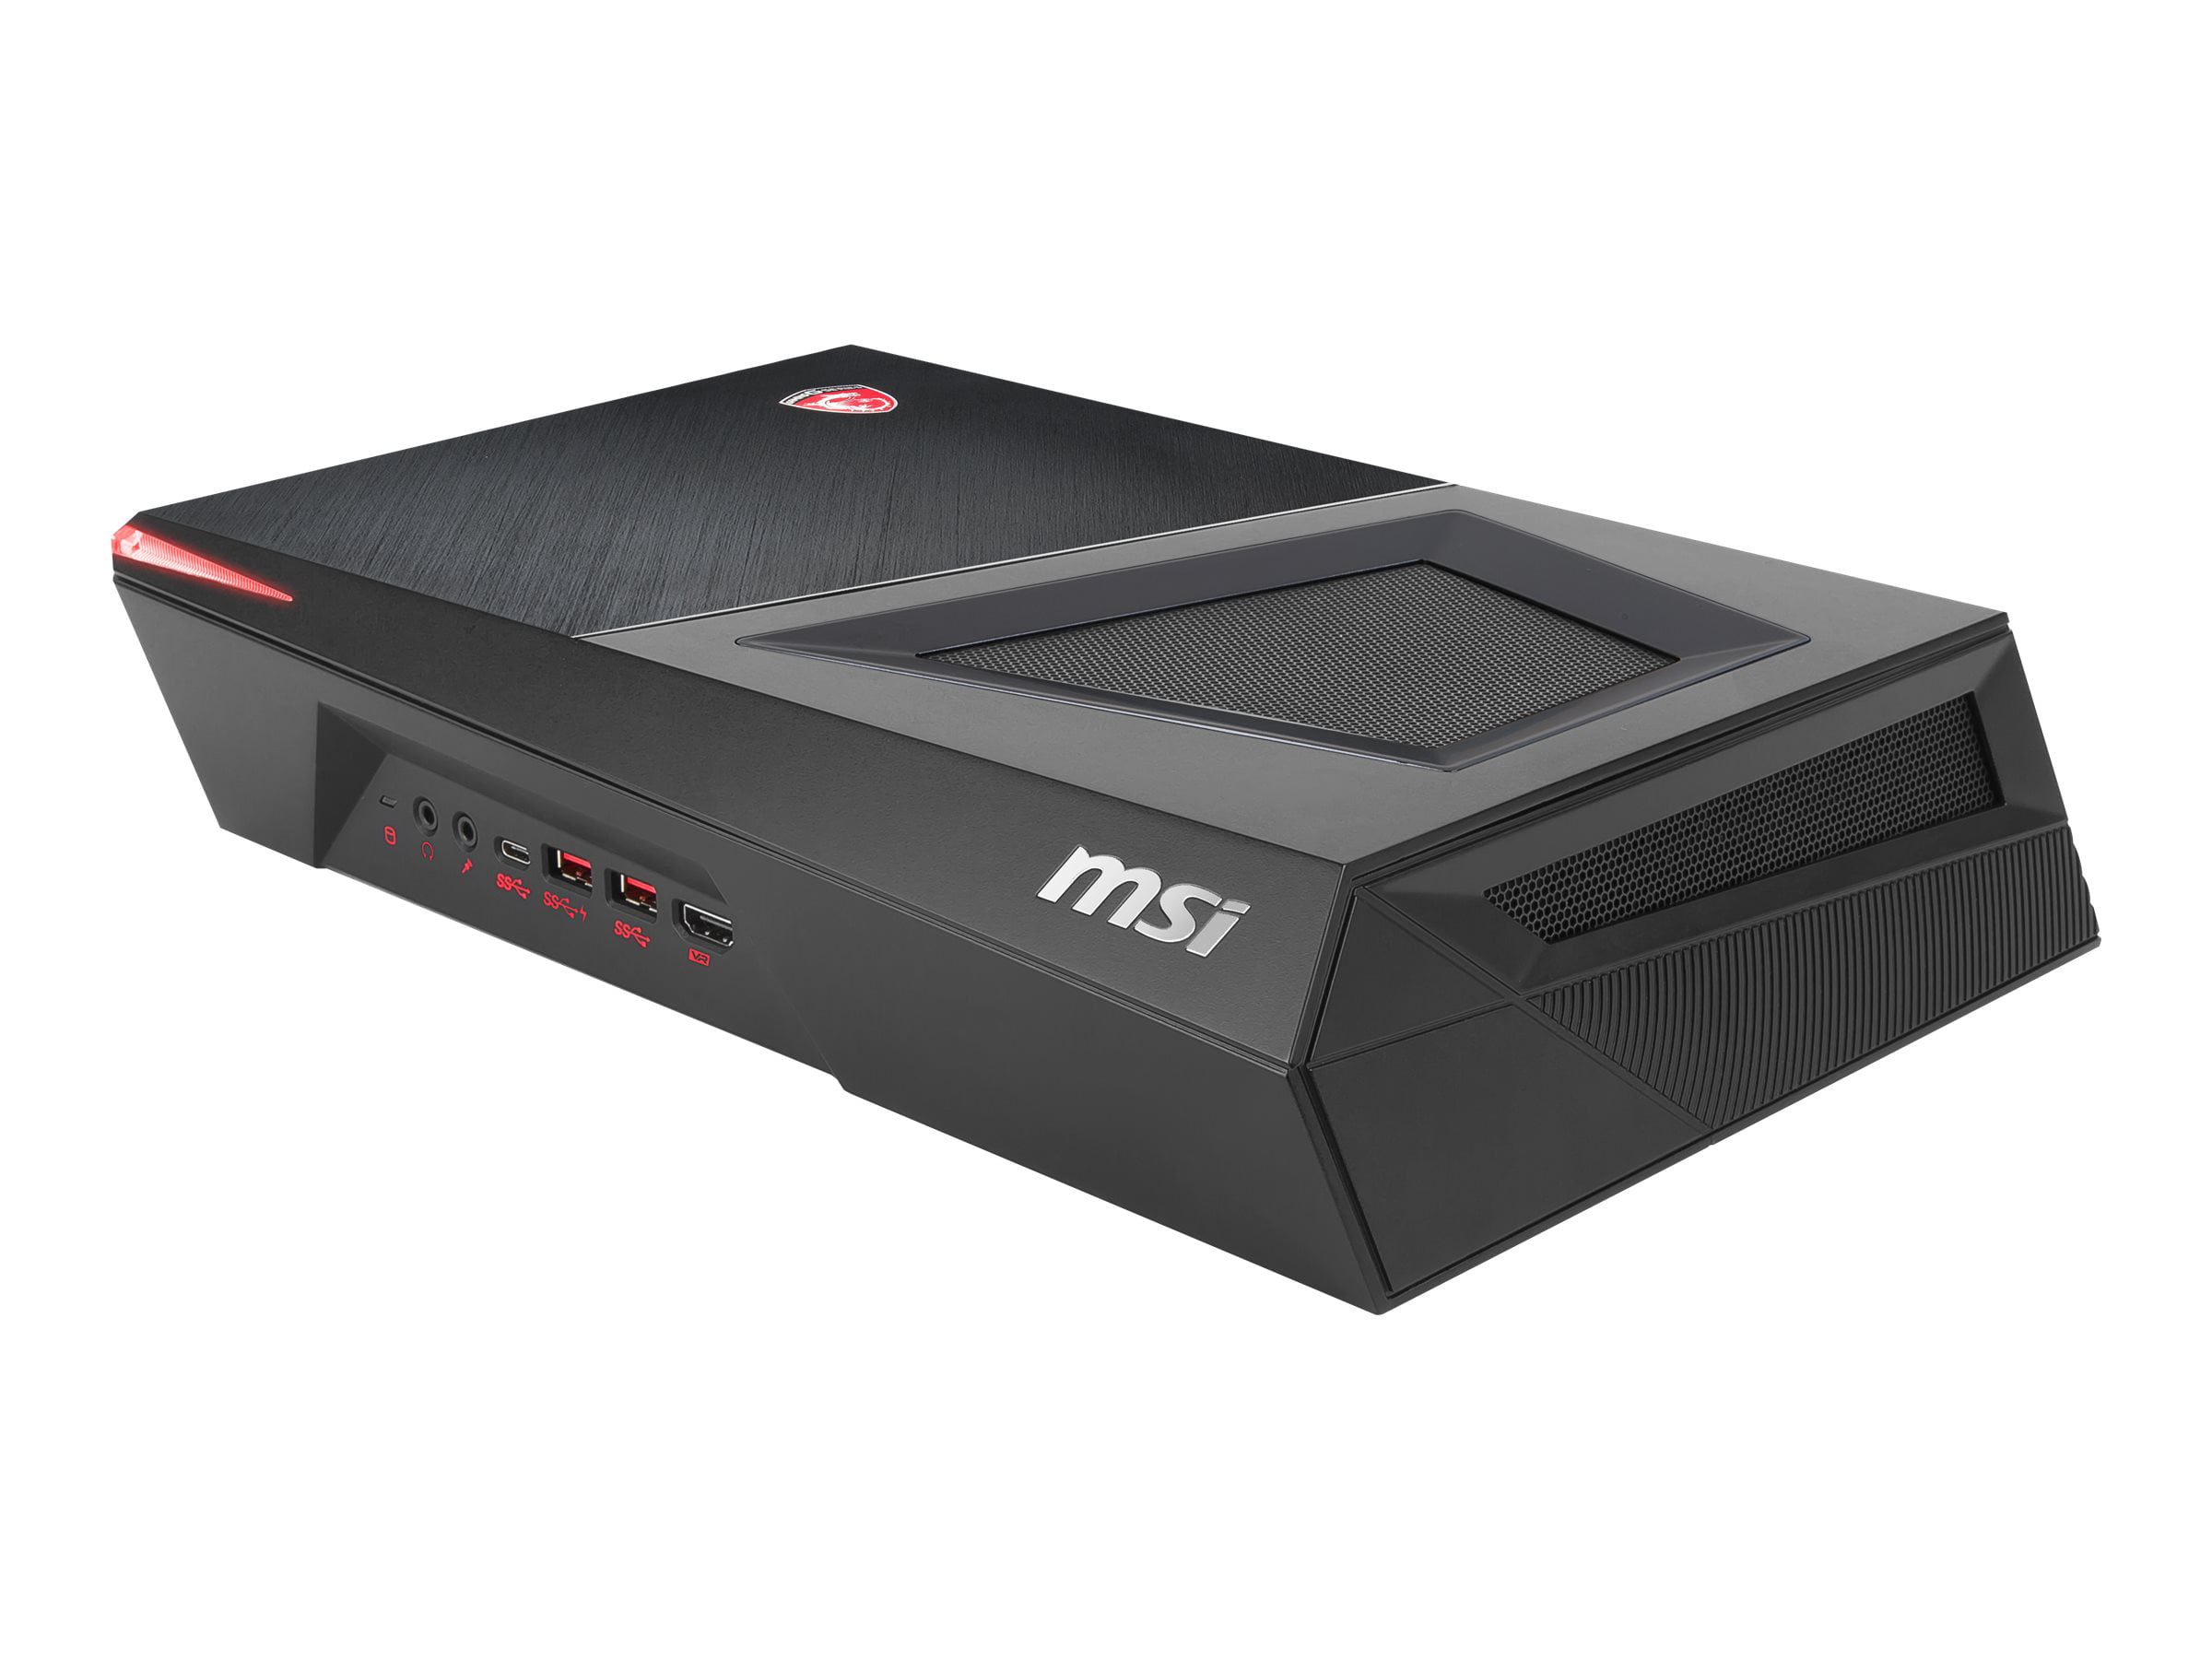 MSI Trident 3 VR7RC 089US - DTS - Core i7 7700 / 3.6 GHz - RAM 8 